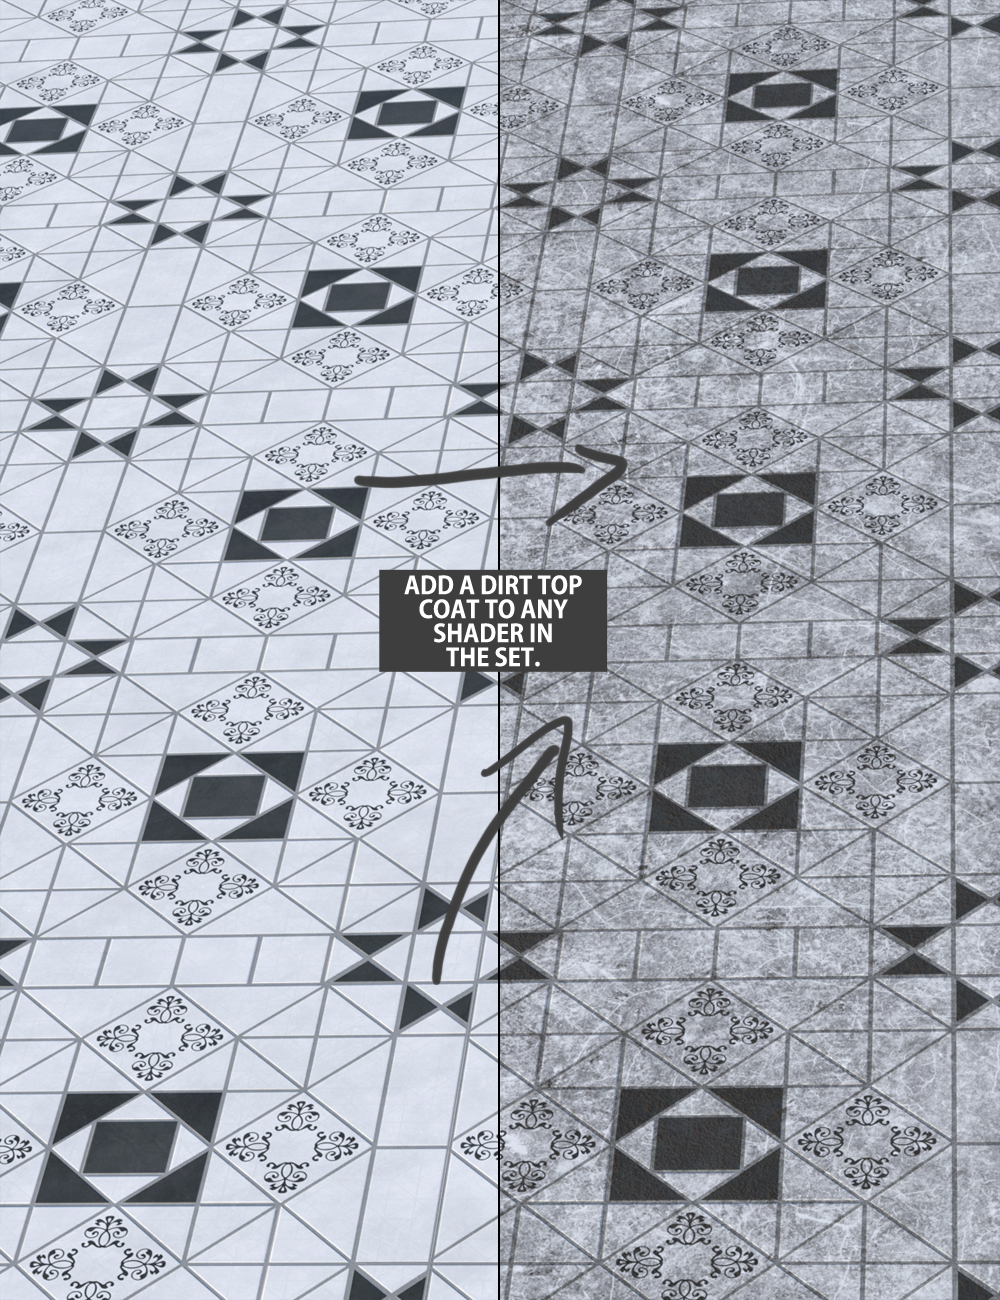 Edwardian Inspired Floor Tile Shaders Vol 2 by: ForbiddenWhispers, 3D Models by Daz 3D